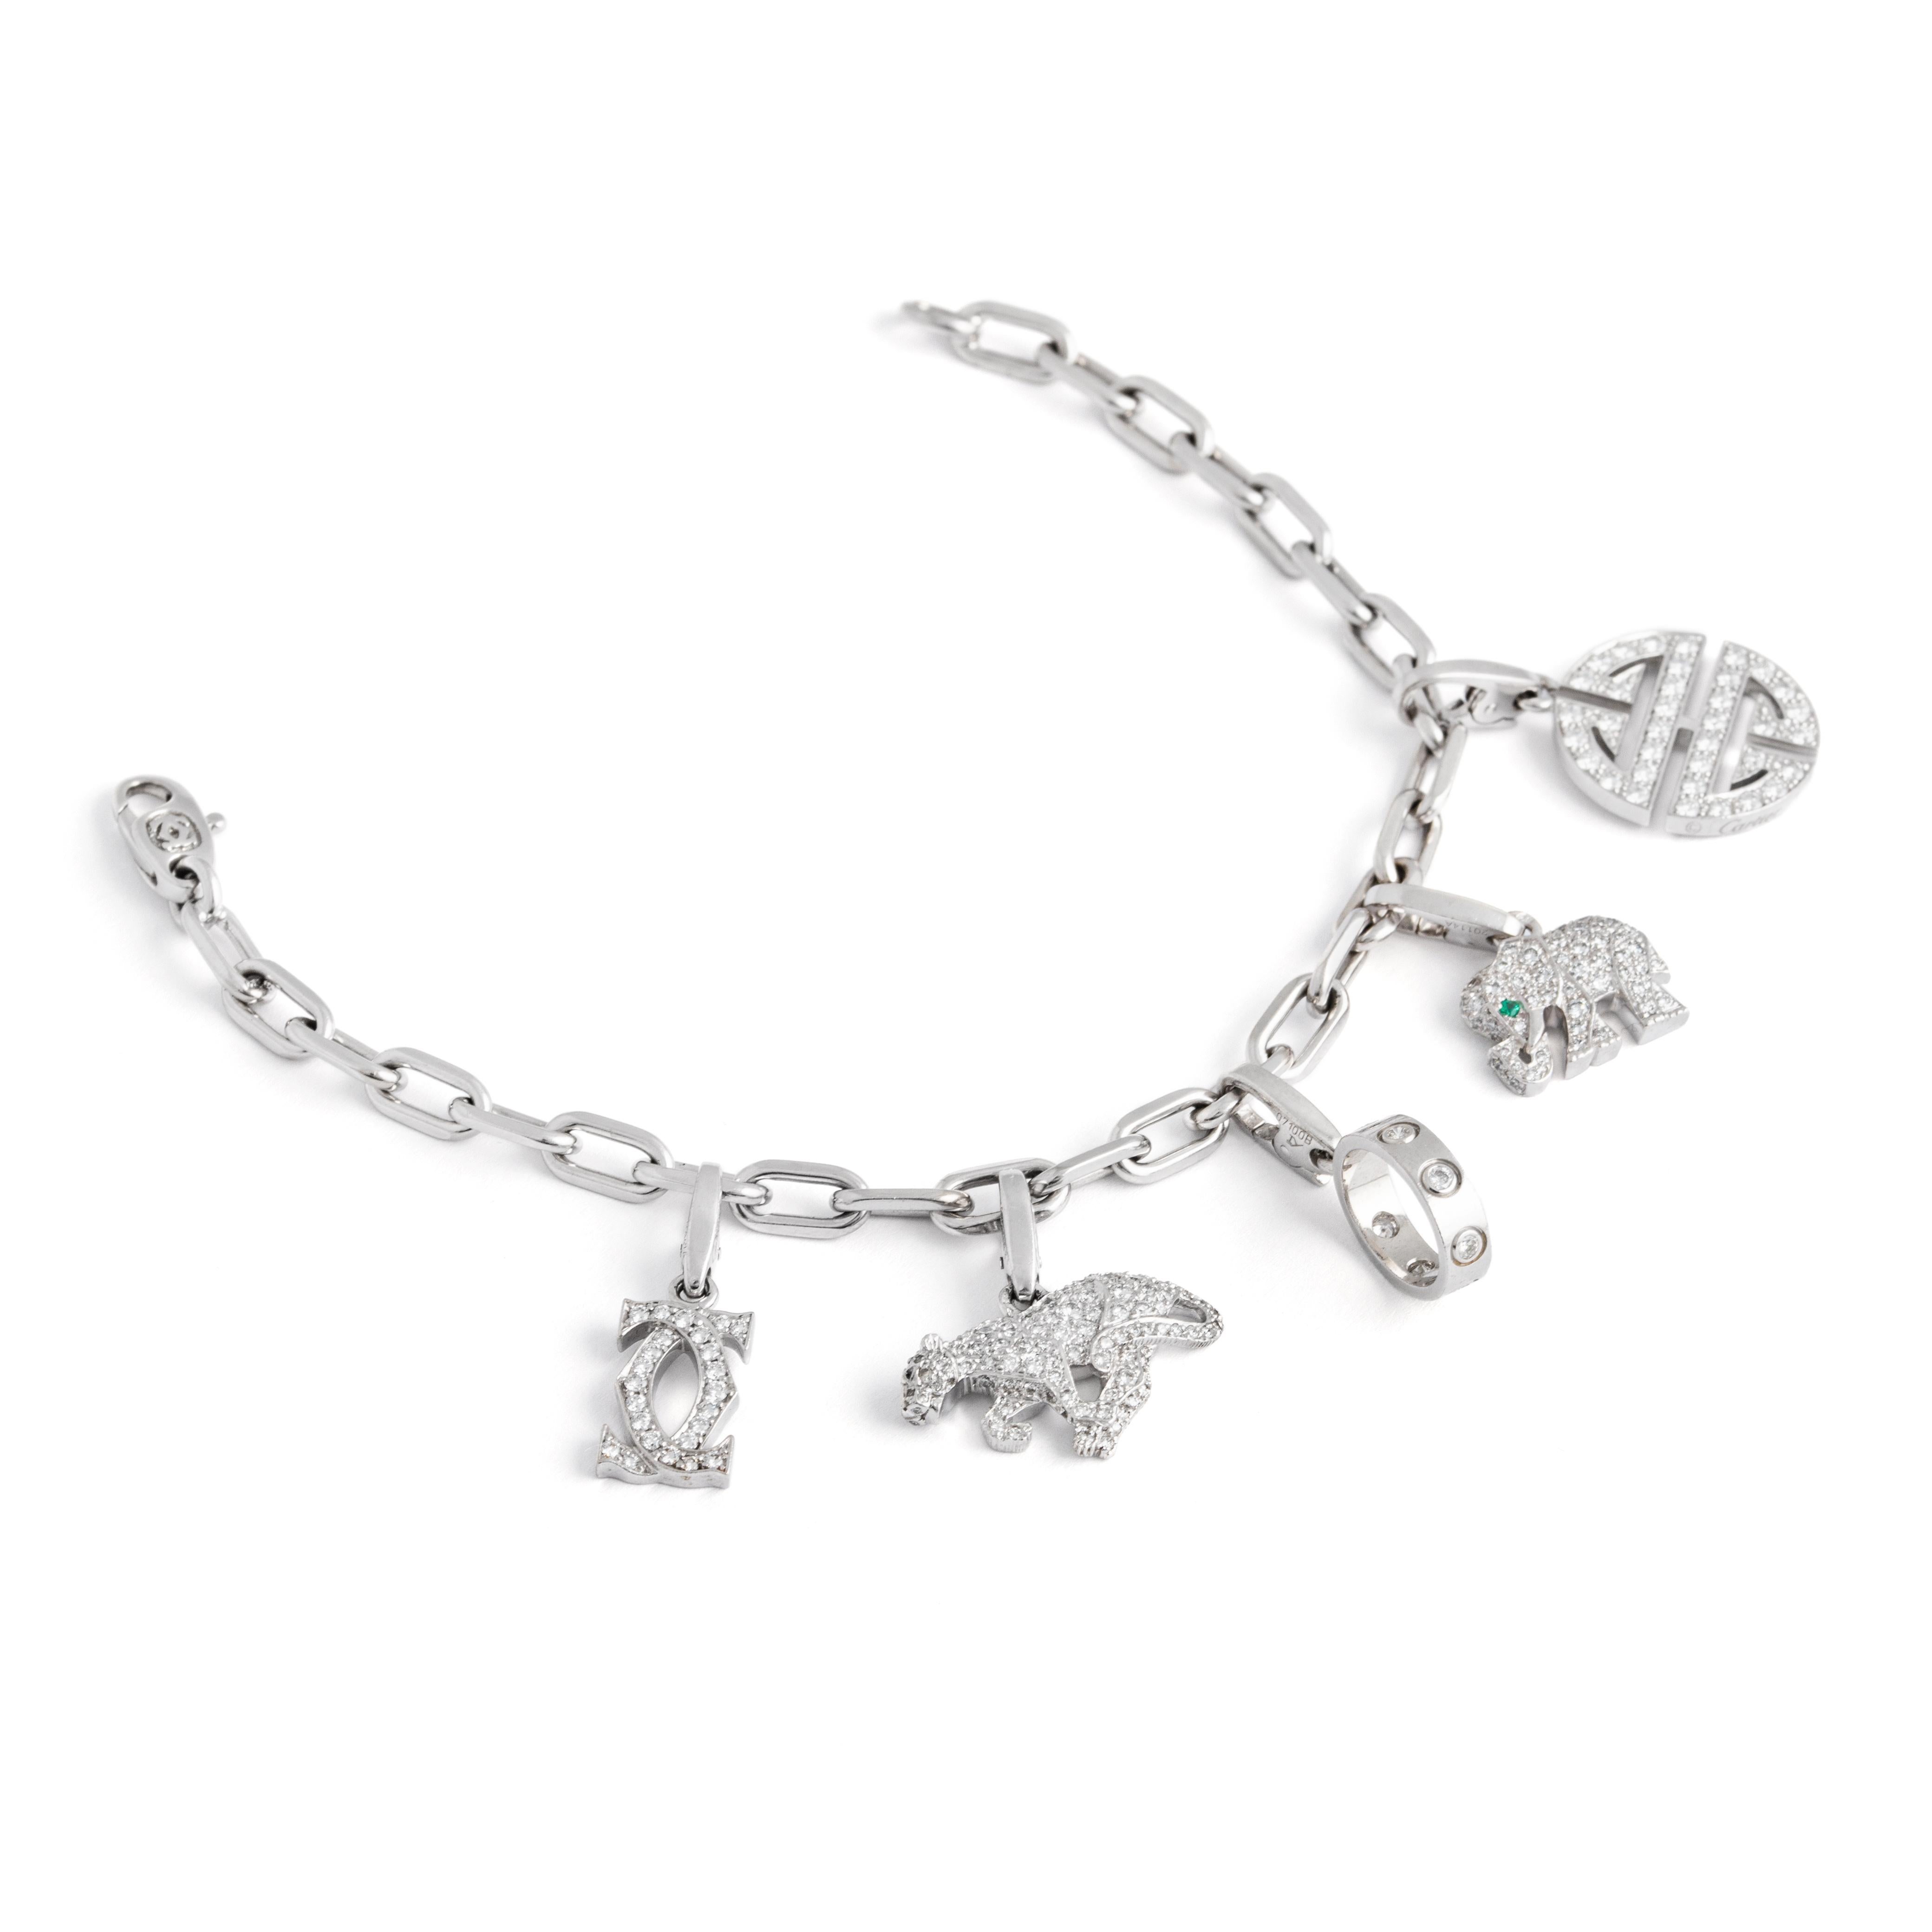 Rare Cartier Diamond Set Charm Bracelet White Gold 18K.
Each charm and the chain bracelet are respectively signed Cartier, numbered and marked and each one accompanied by an original Cartier certificate.

The piece is firstly composed of an elegant